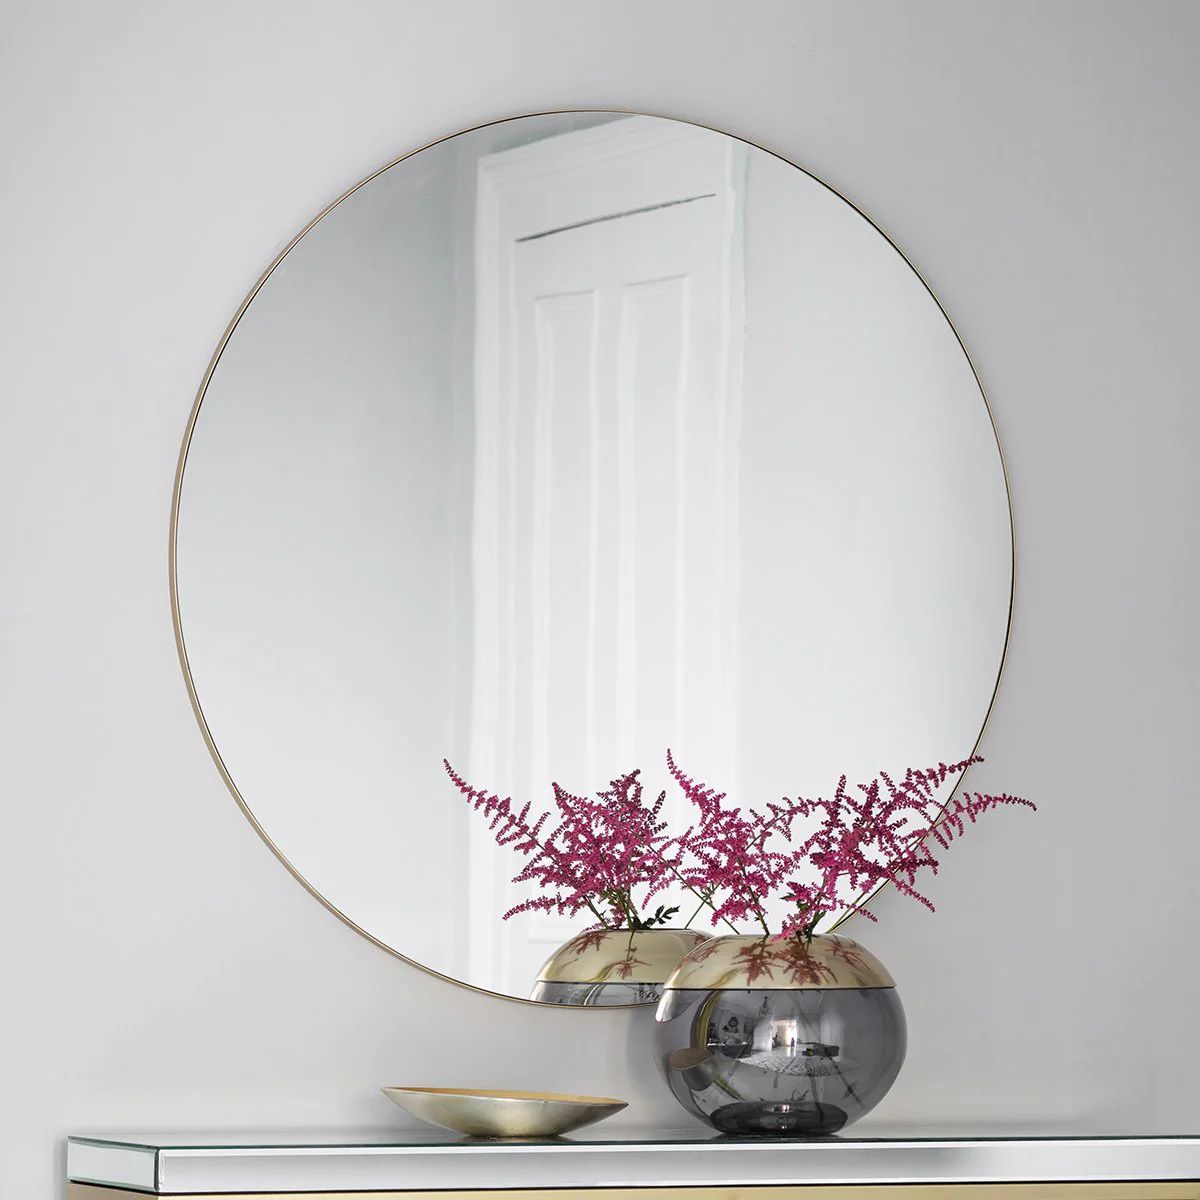 Gallery Direct Hayle Round Mirror Champagne | Olivia's